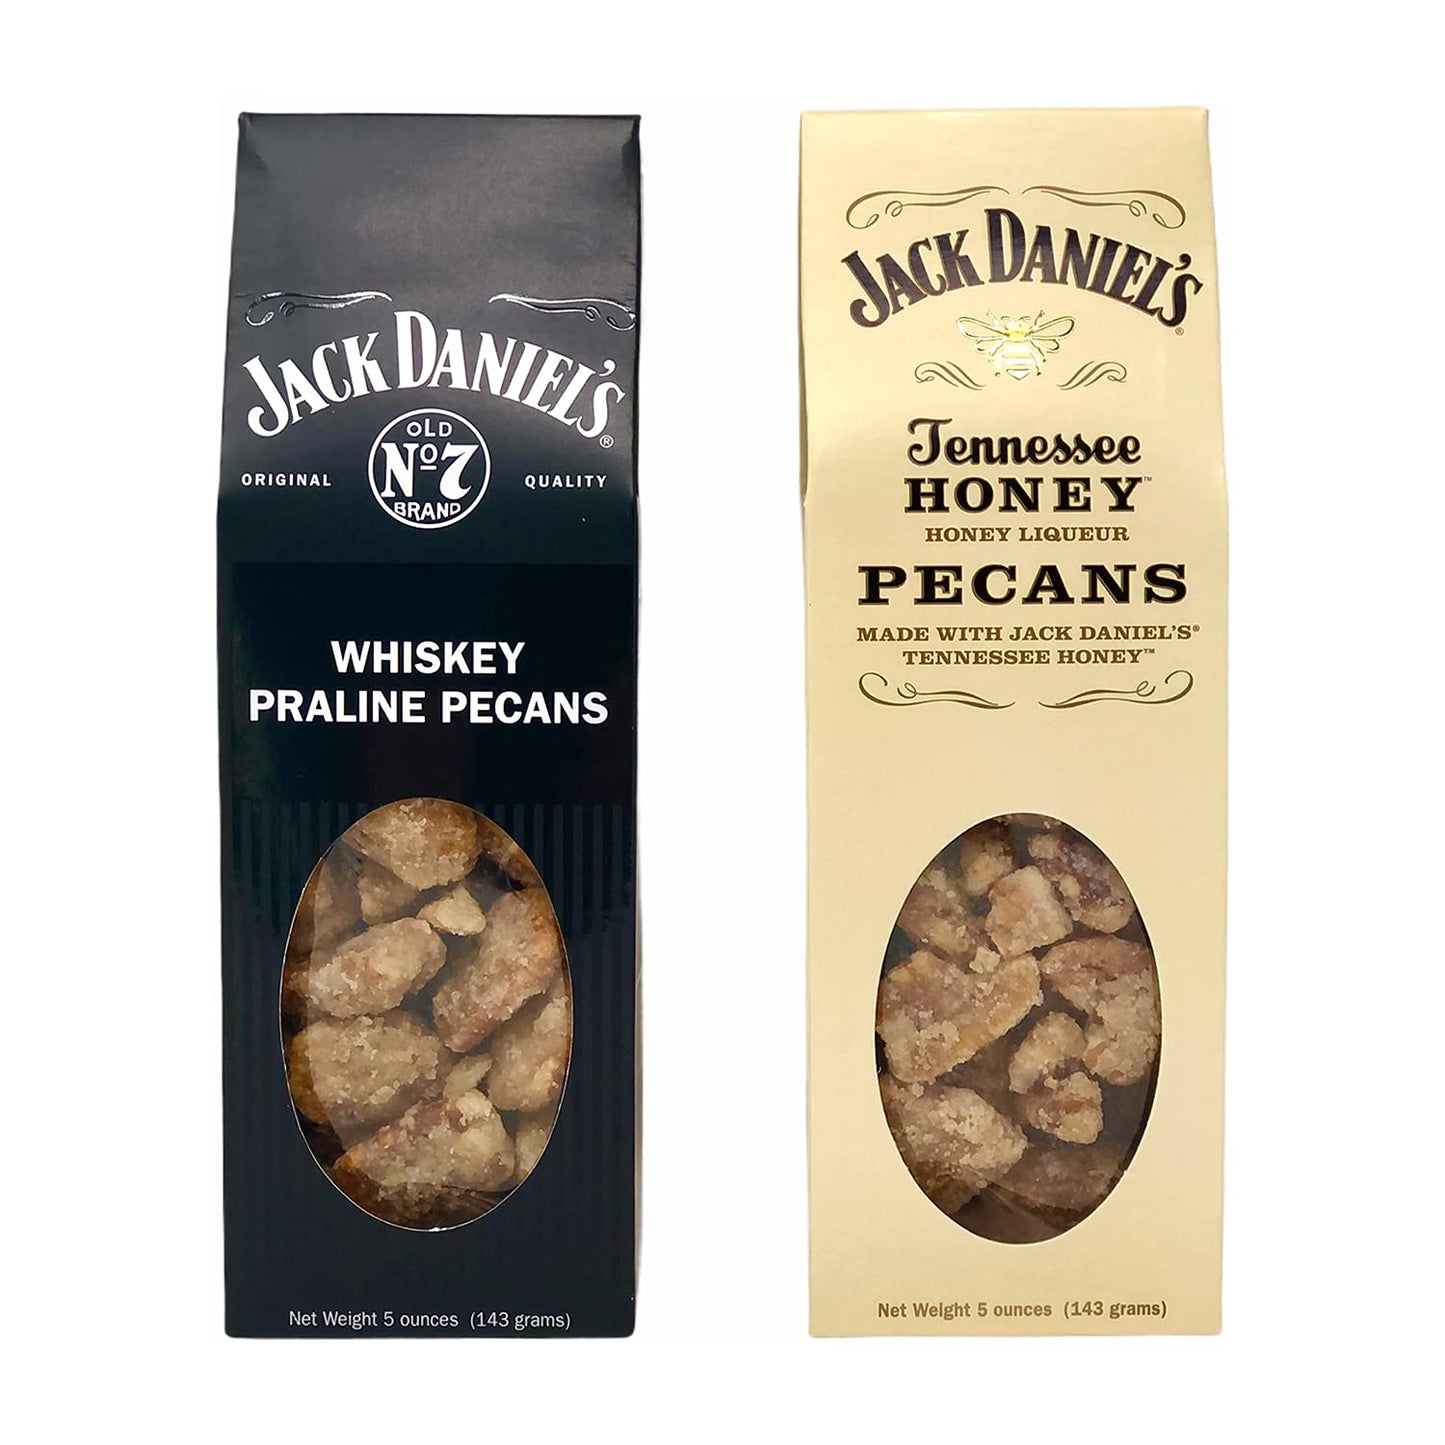 Jack Daniel's Whisky and Tennessee Honey Pecan Set - 5 oz x 2 pack